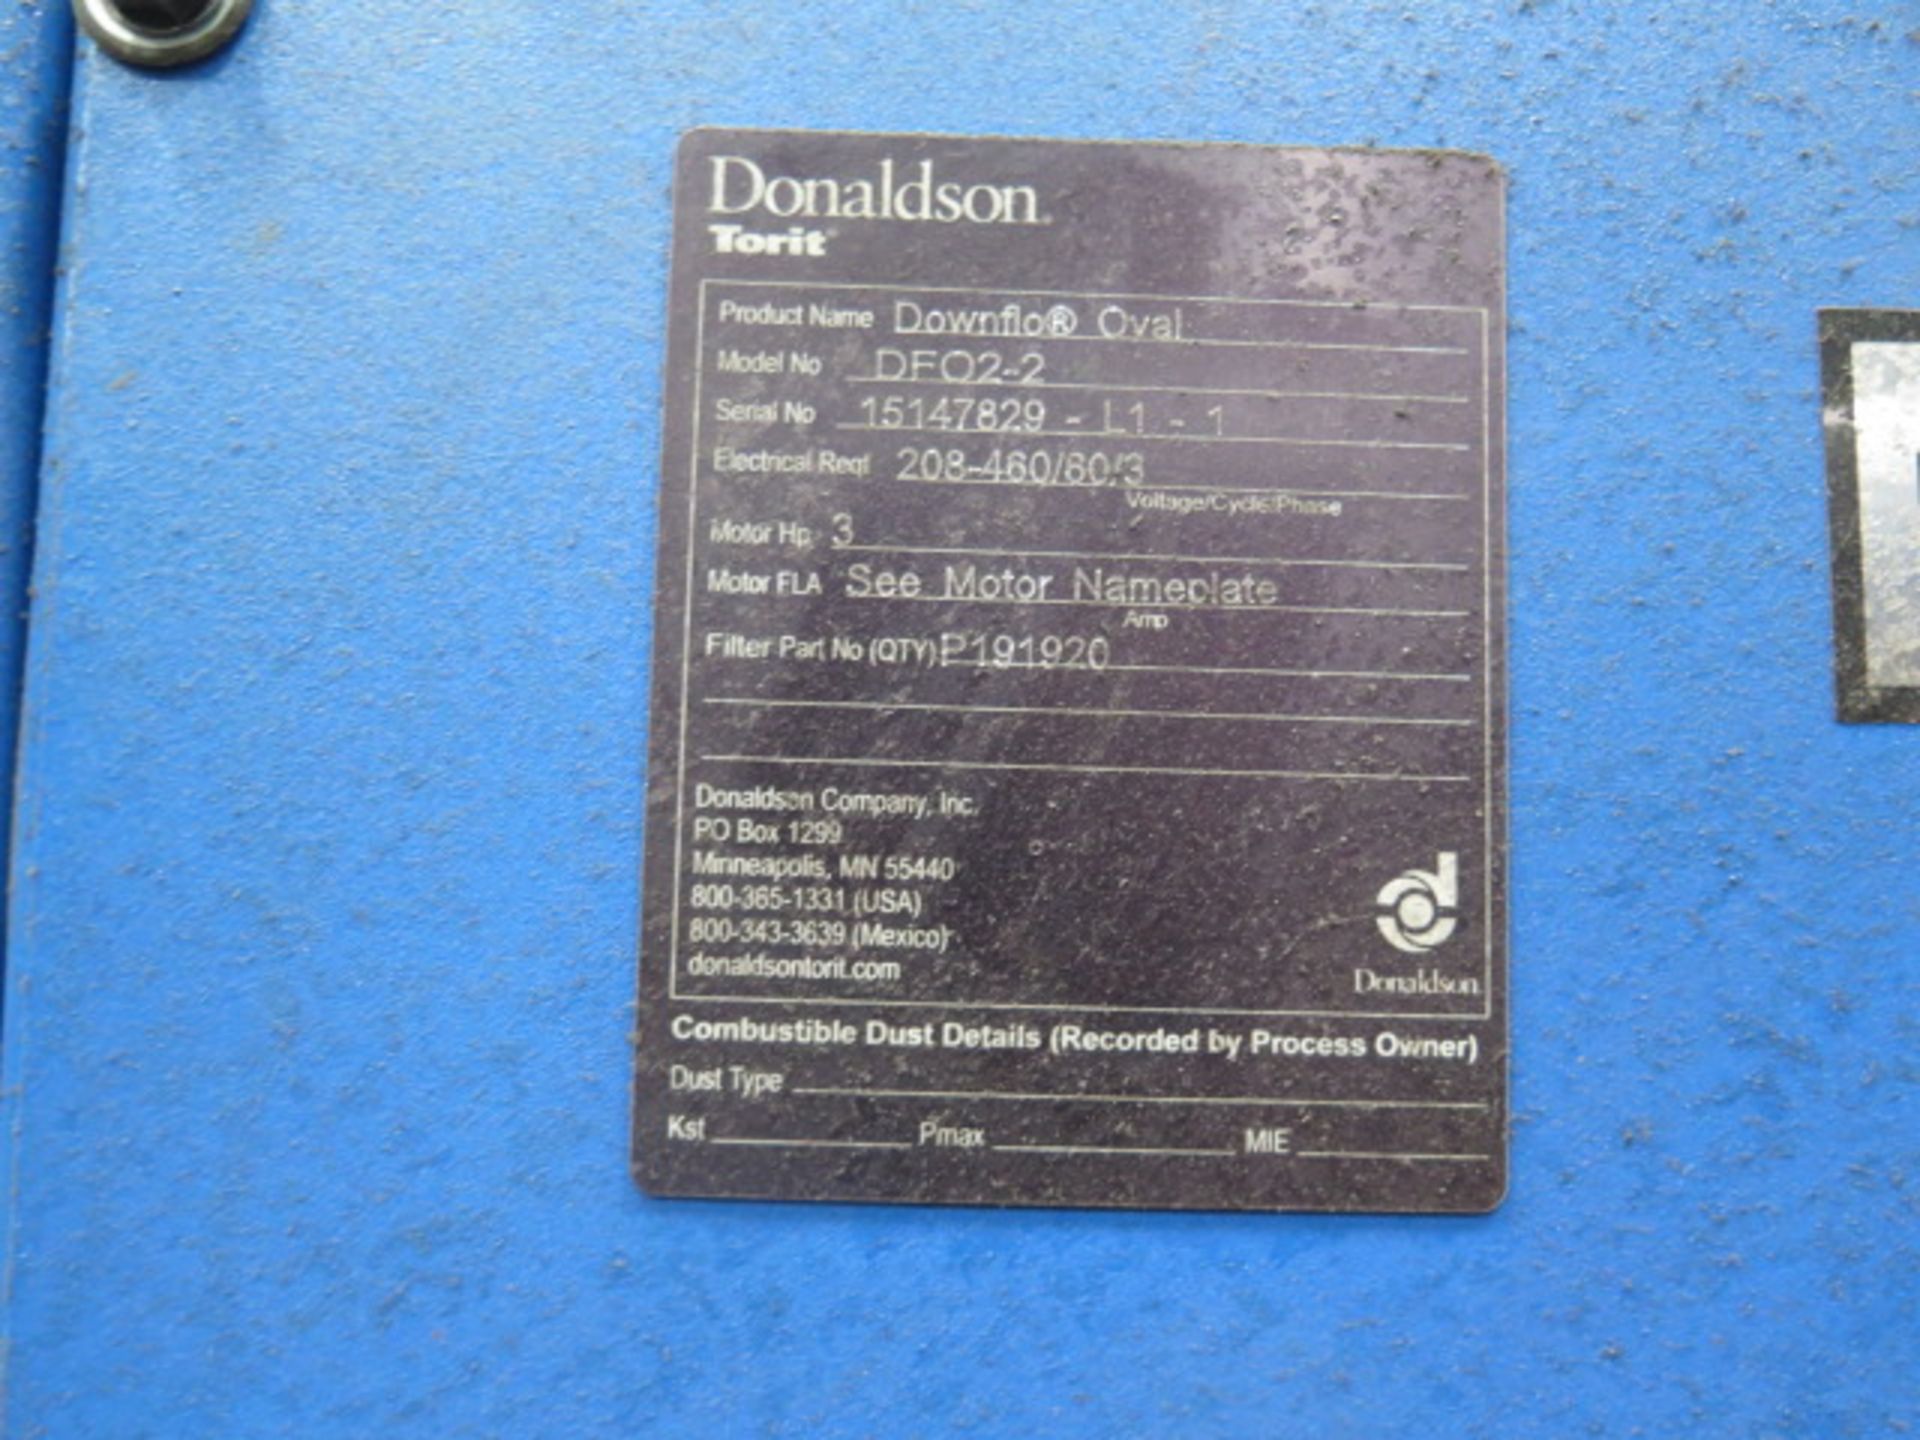 Donaldson Torit DF02-2 Down Flo Dust Collector s/n 15147829-L1-1, SOLD AS-IS - NO WARRANTY) - Image 7 of 7